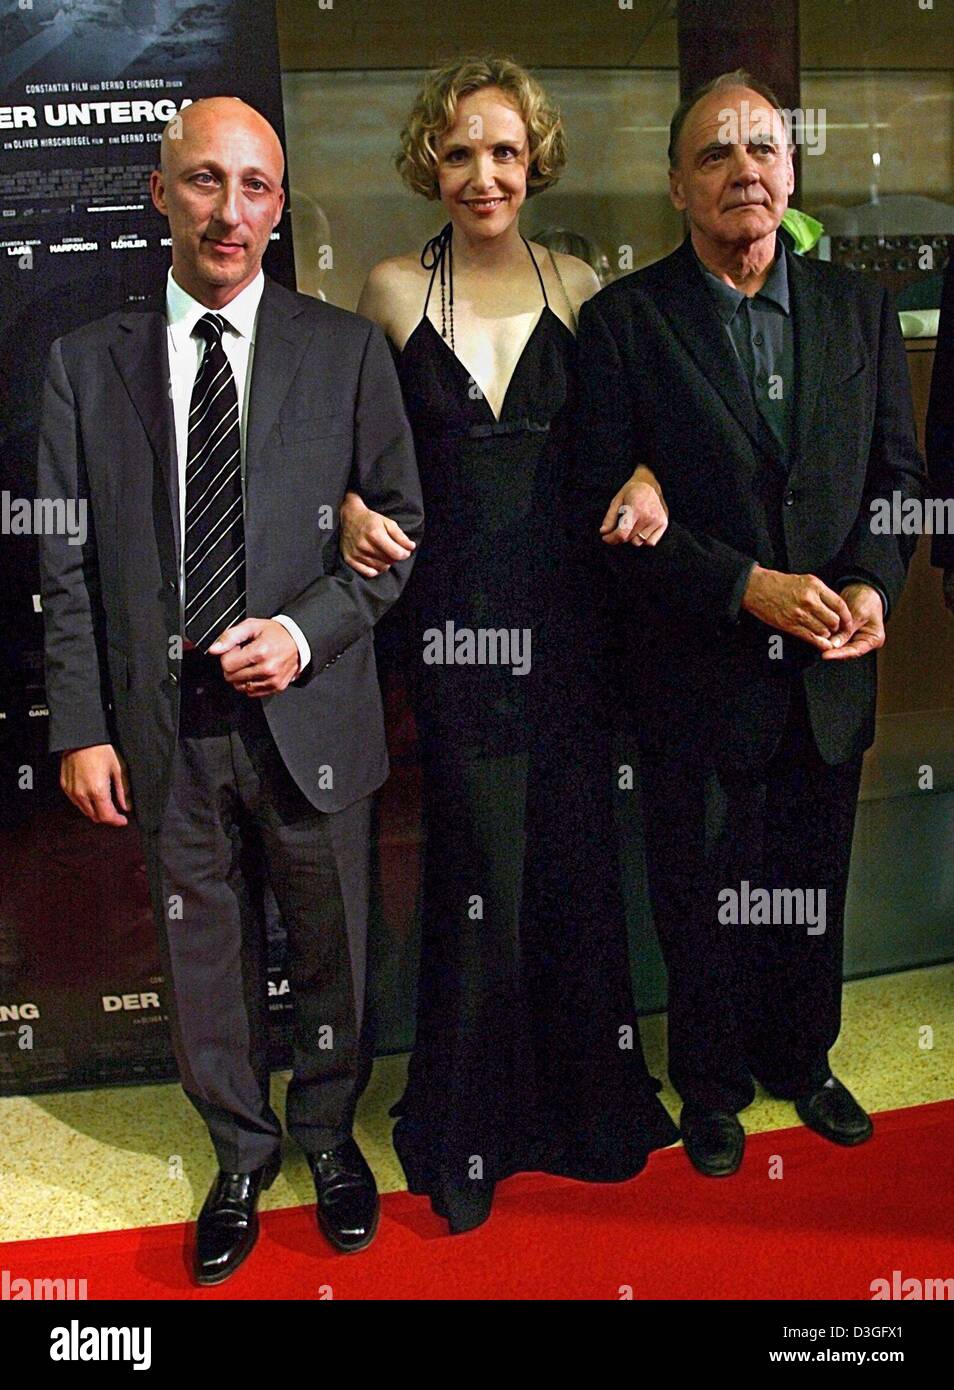 (dpa) - Director Oliver Hirschbiegel (L) and actors Juliane Koehler (C) and Bruno Ganz pose in front of the posters for their film 'The Downfall: Hitler and the End of the Third Reich' which premiered in Munich, 9 September 2004. The film, which deals with the last days in the life of Adolf Hitler, celebrated its world premiere and is going to be released in Germany on 16 September Stock Photo